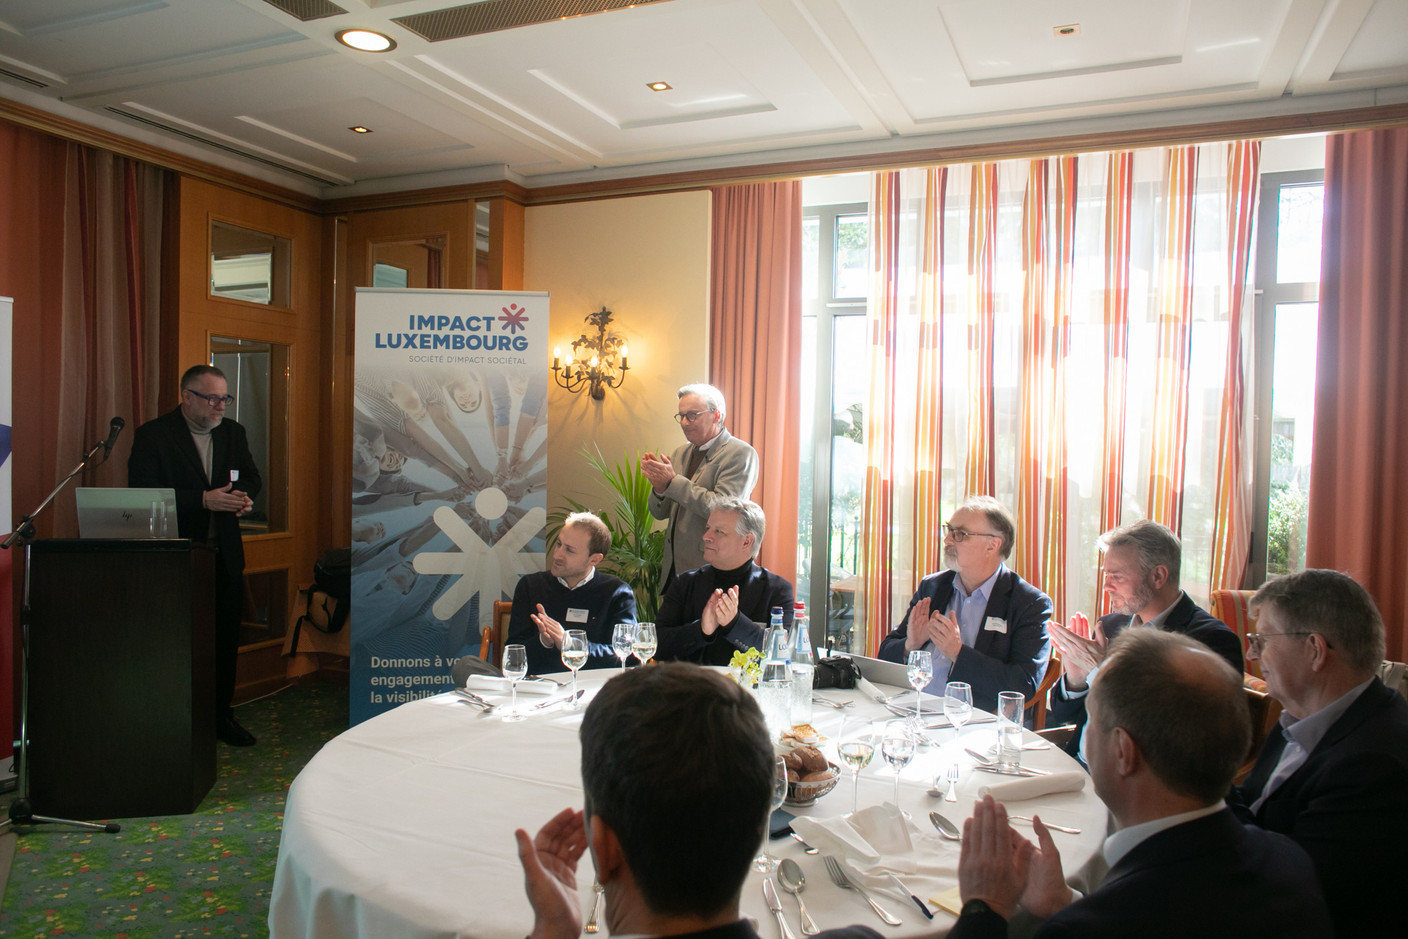 BCC Chairman Daniel Eischen and Uless director Daniel Tesch spoke at the Impact Luxembourg lunch event, hosted by the British Chamber of Commerce on 21 February 2023 at the Hotel Parc Belair. Photo: Matic Zorman / Maison Moderne